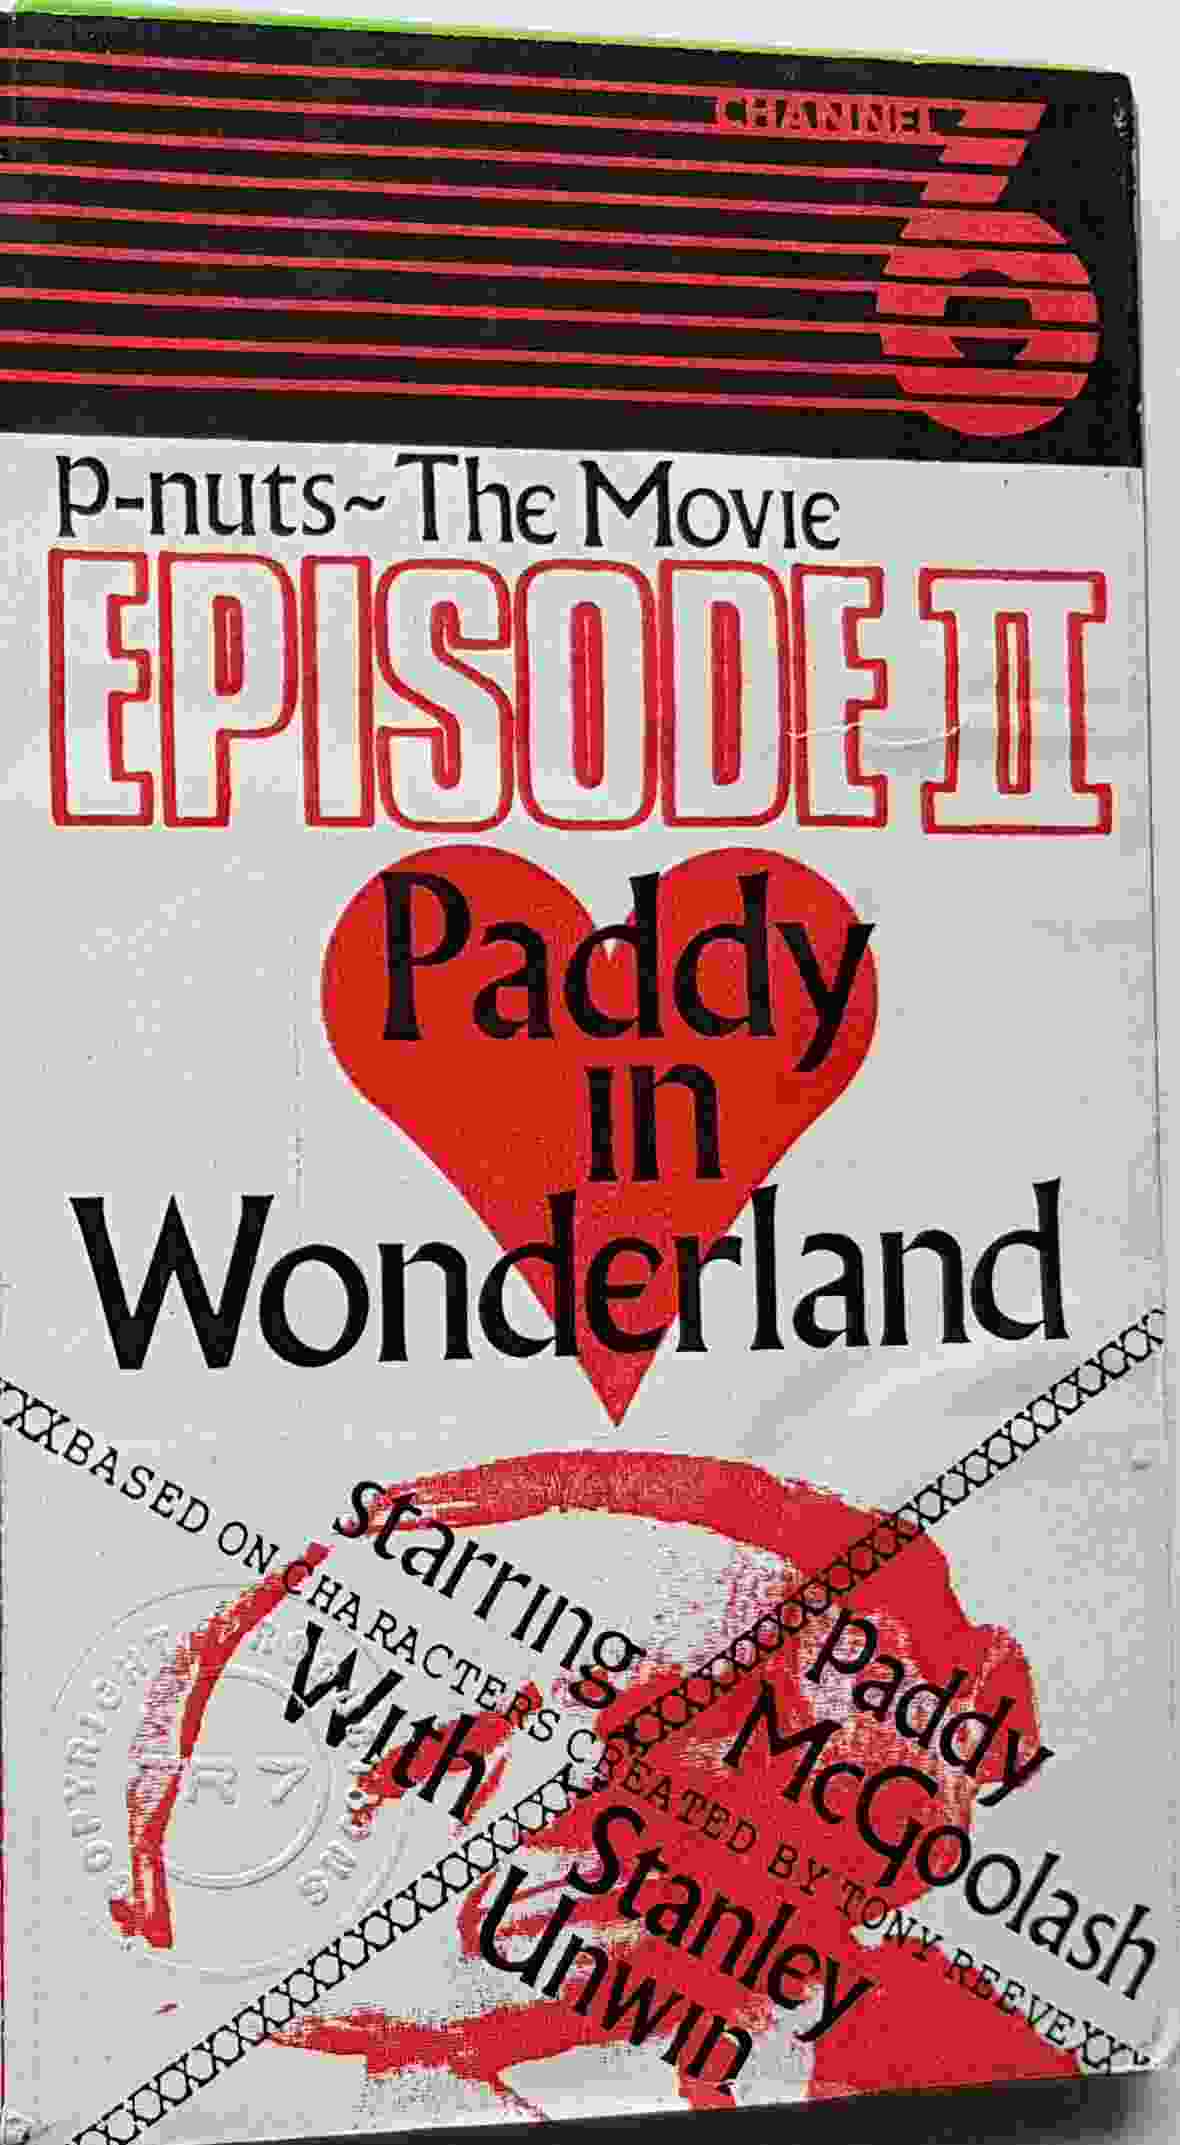 Picture of Paddy McGoolash - Paddy in Wonderland by artist Unknown from ITV, Channel 4 and Channel 5 videos library